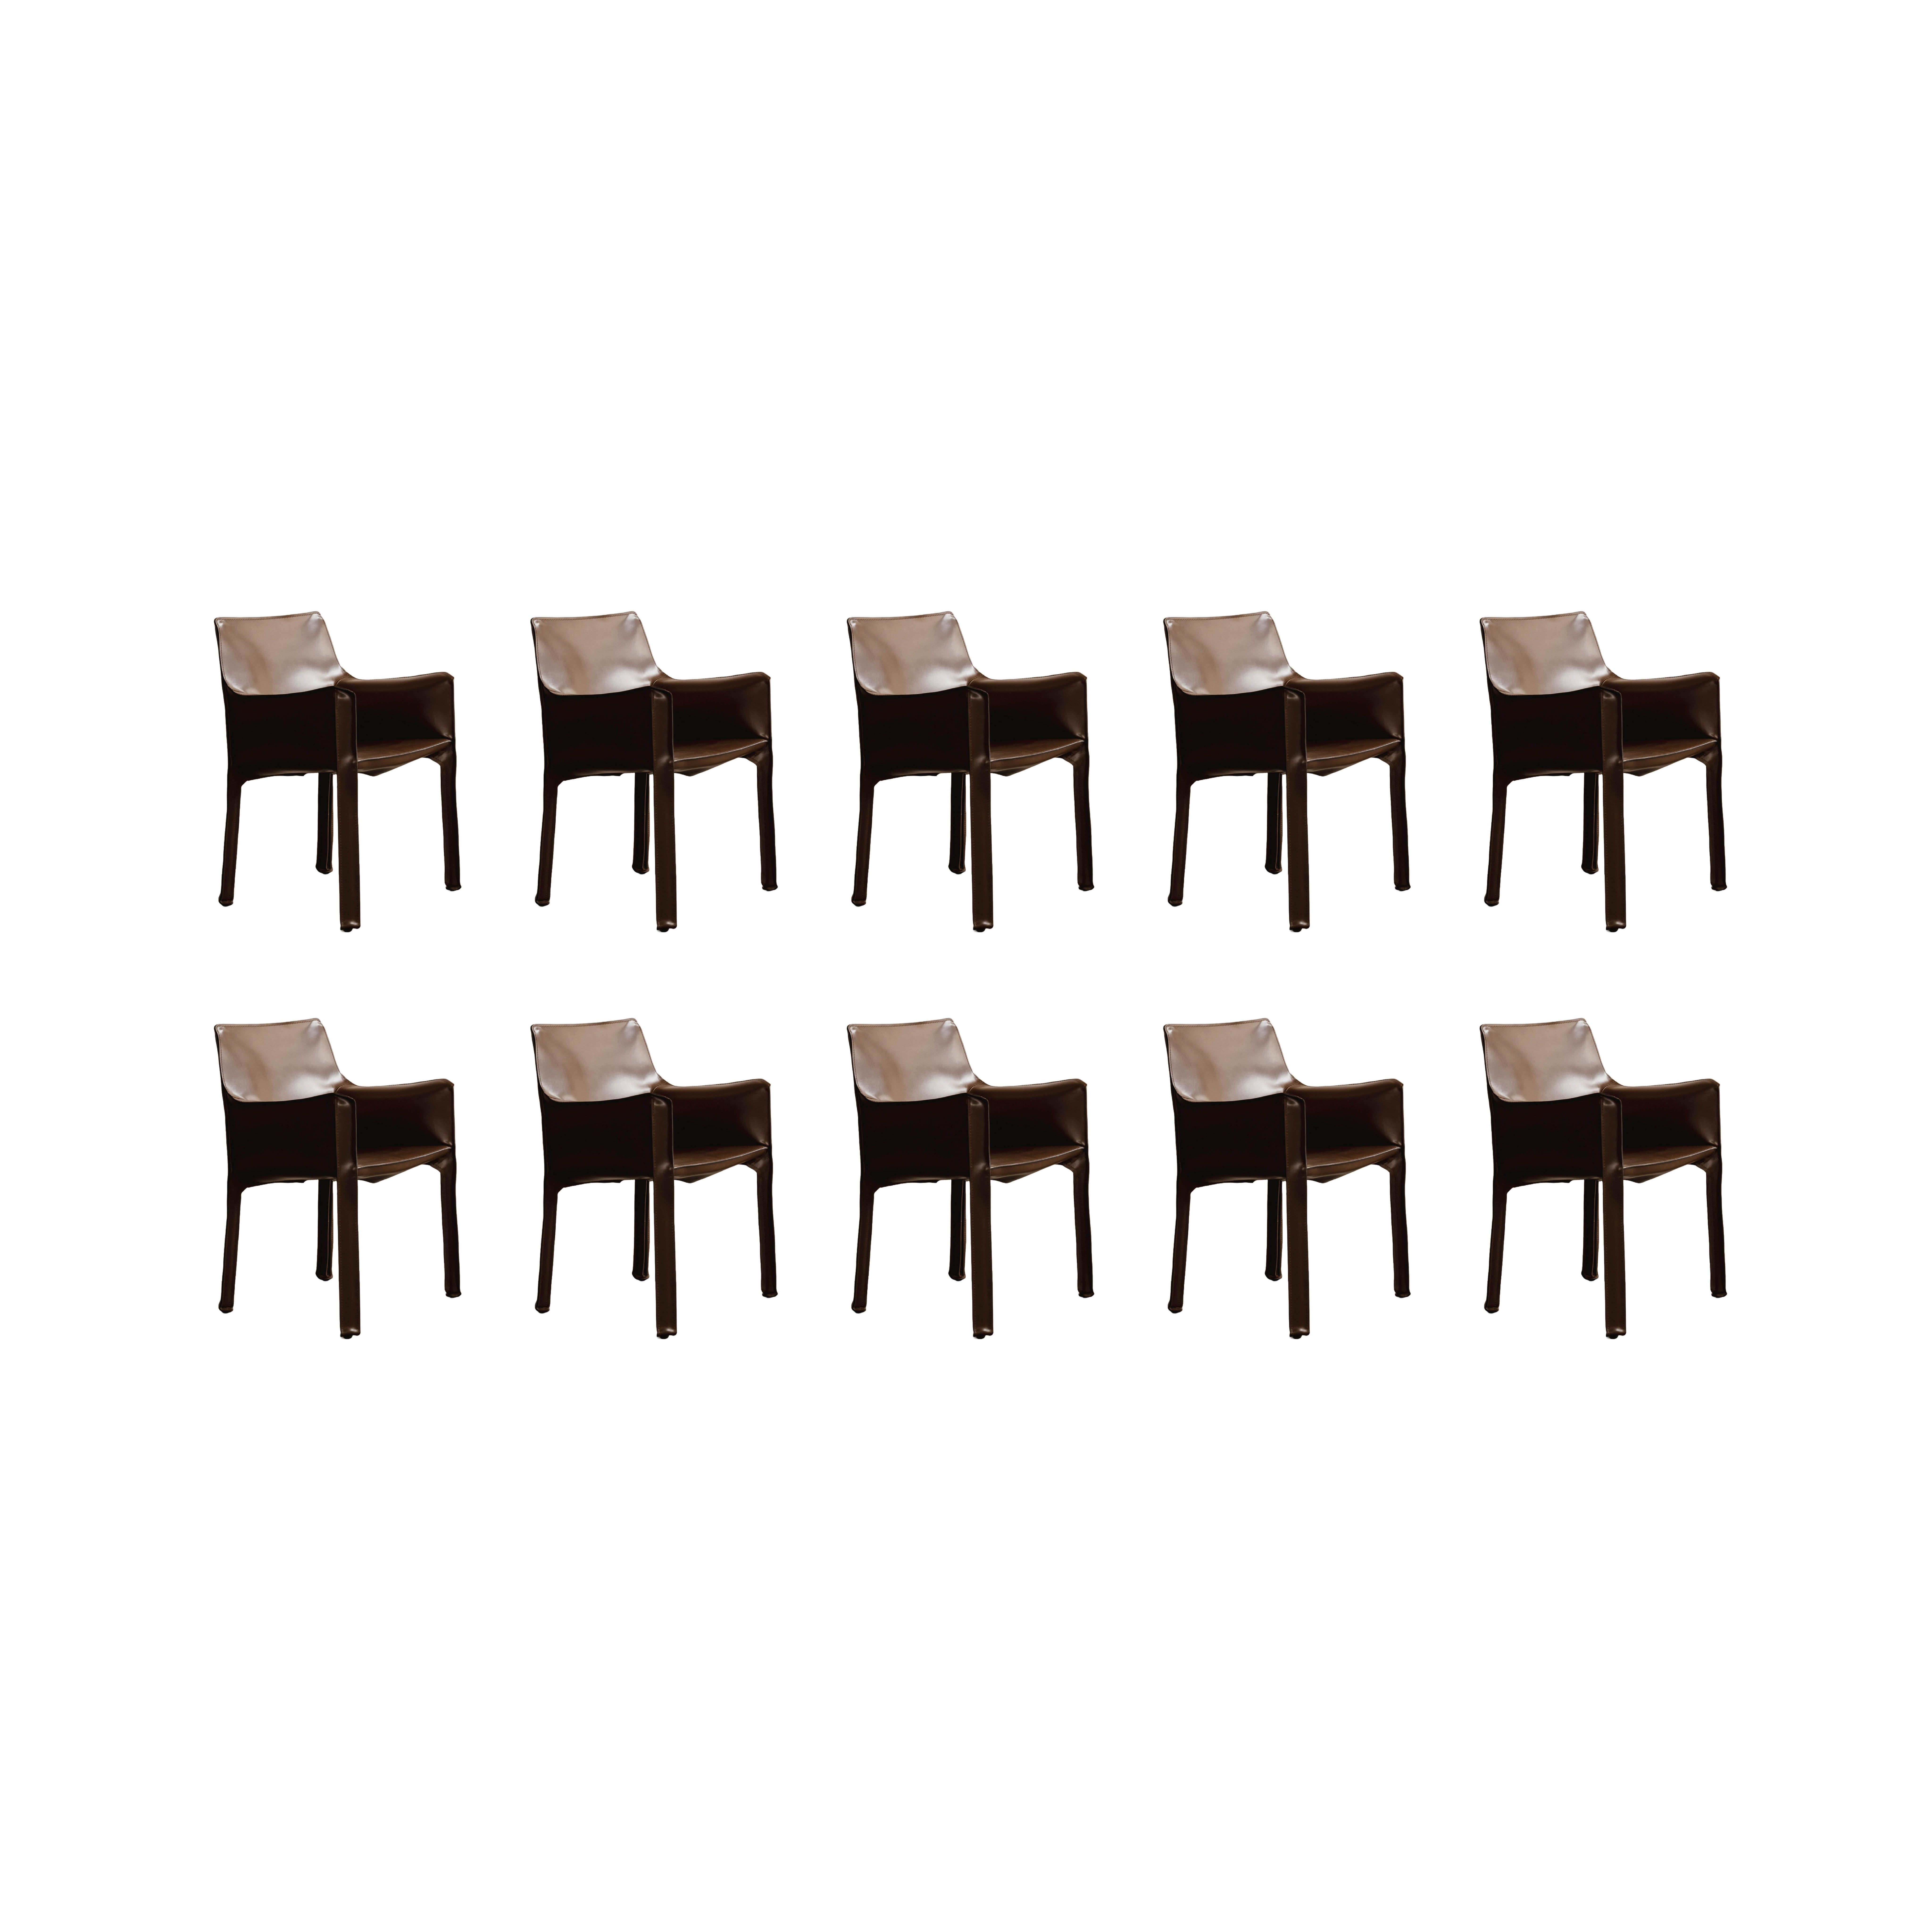 Mario Bellini "CAB 413” Dining Chairs for Cassina, 1977, Set of 10